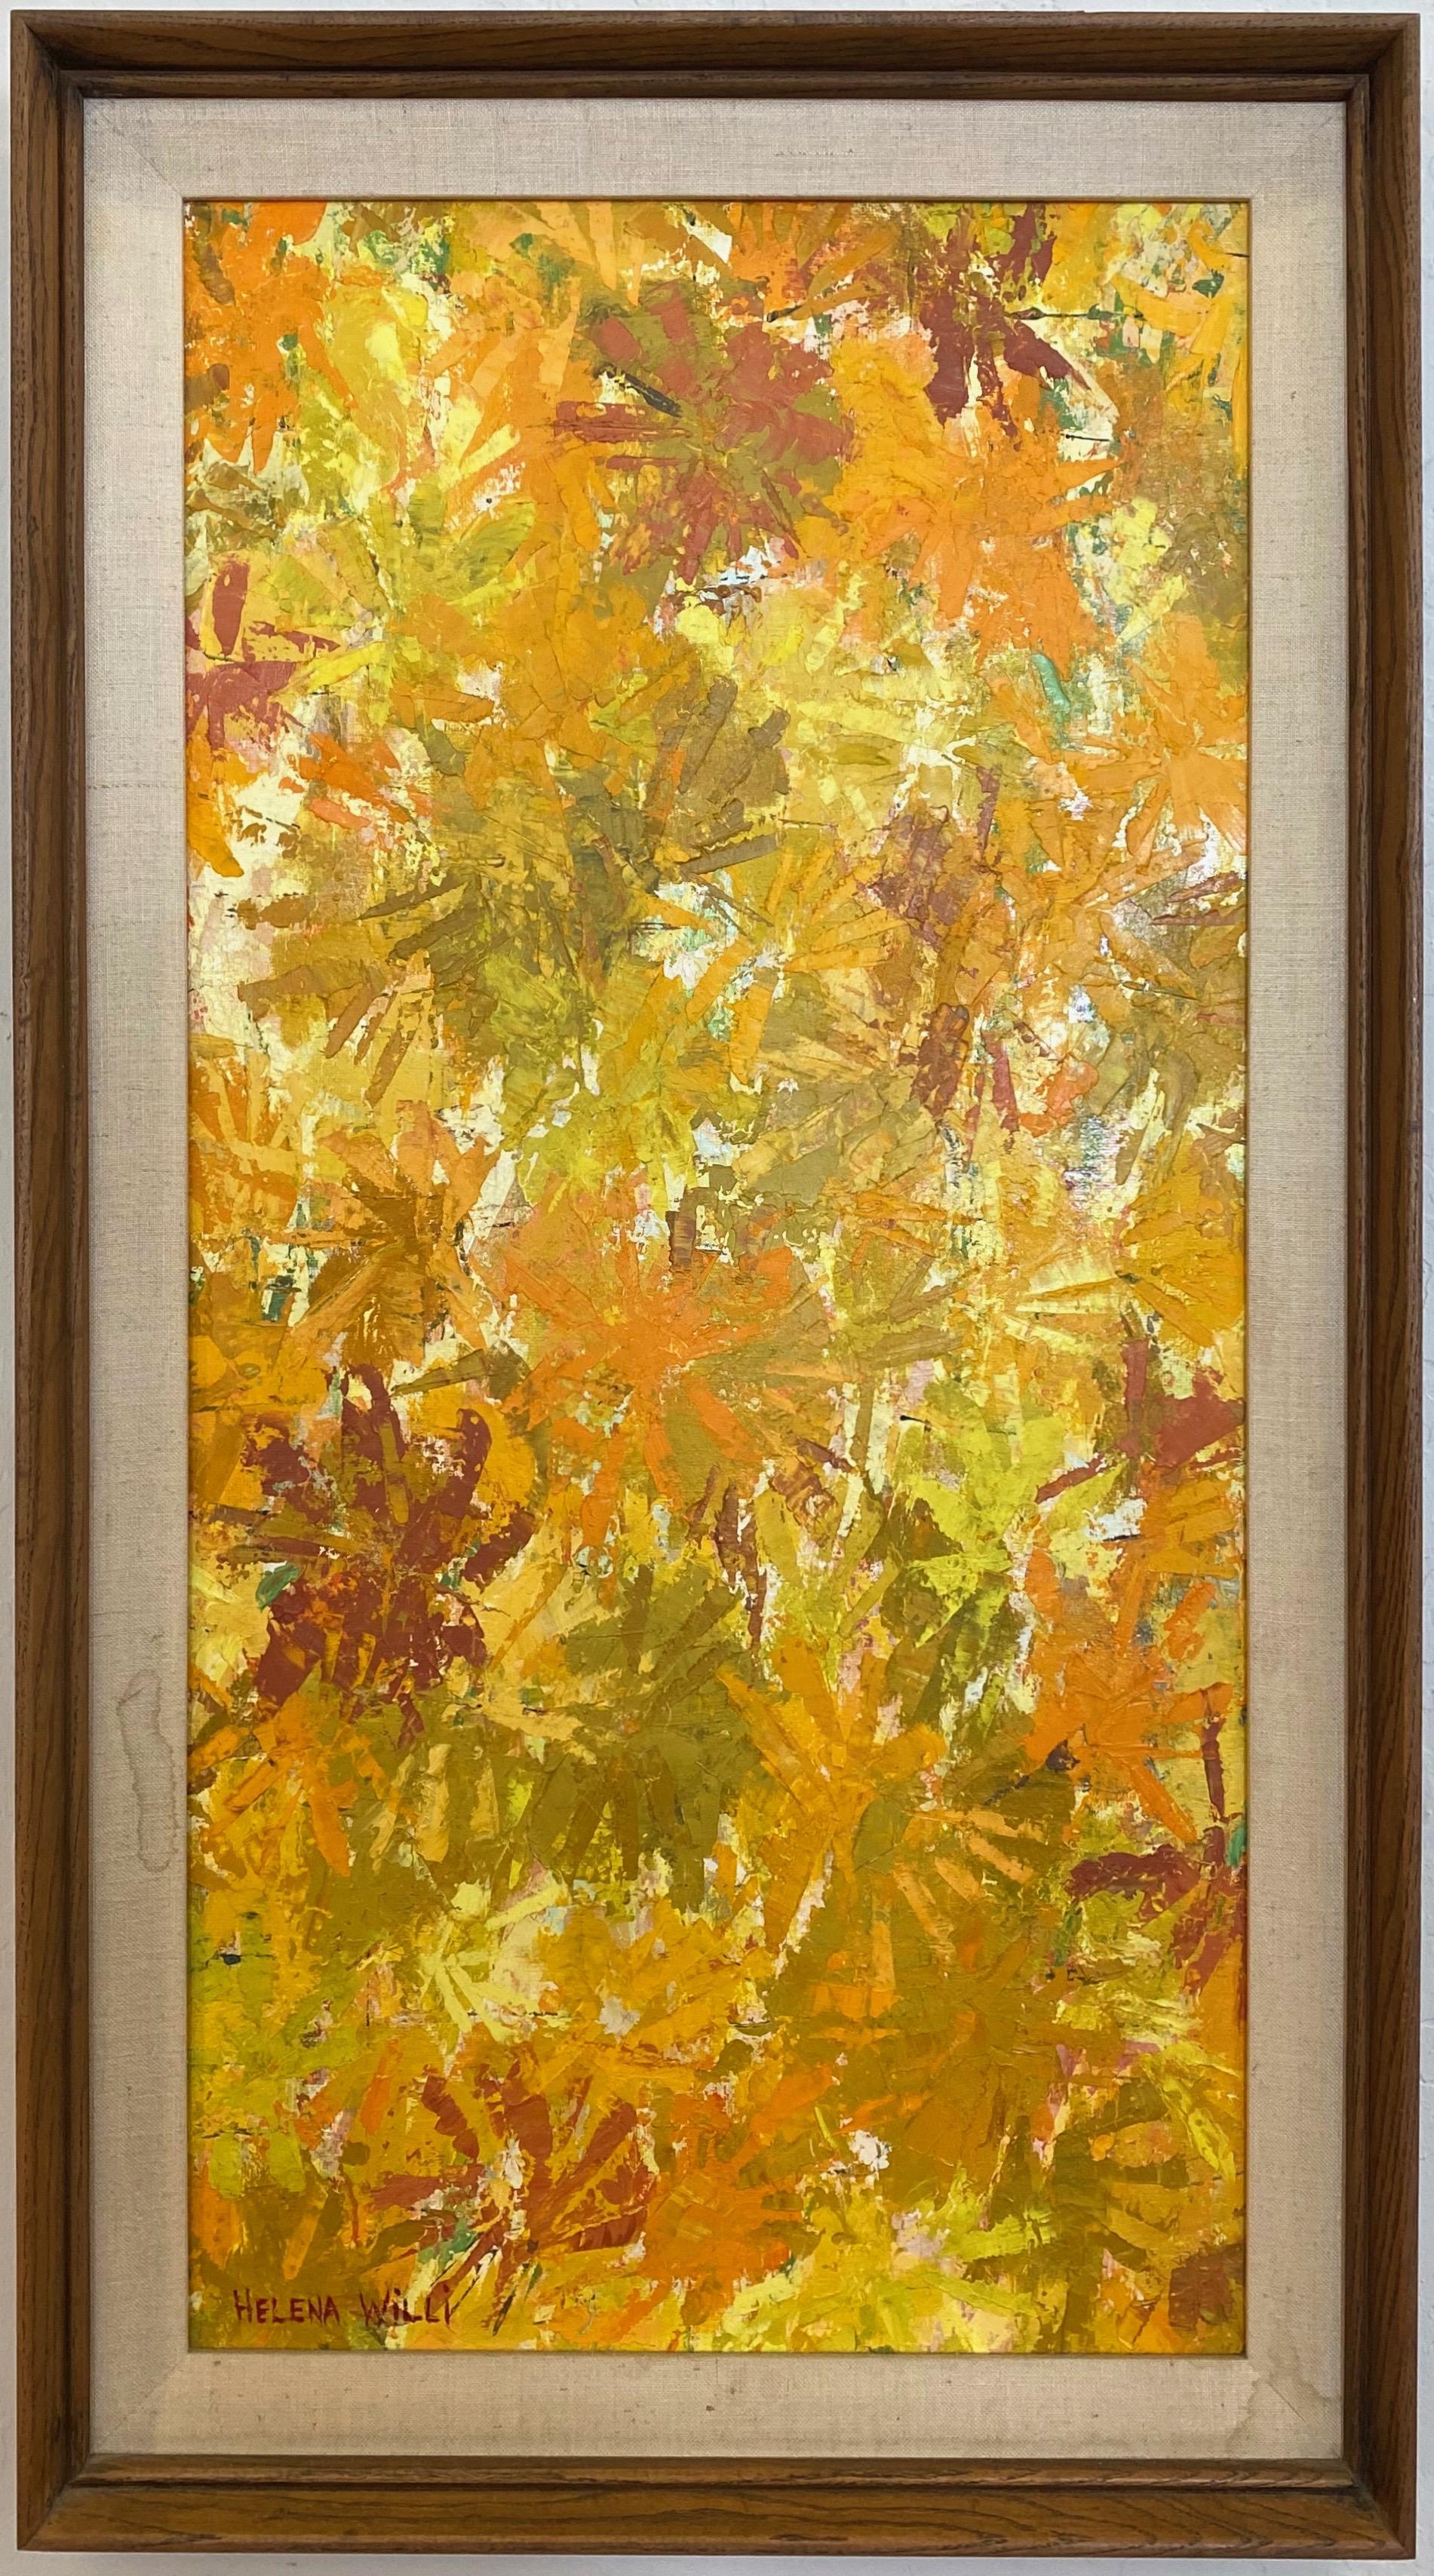 A circa 1960 expressionist flora motif framed oil painting on panel titled “Autumn” by San Francisco Bay Area artist Helena Willi.

Thick impasto explosion of fireworks-like leaves in classic fall colors of yellow, olive green, orange, and brick